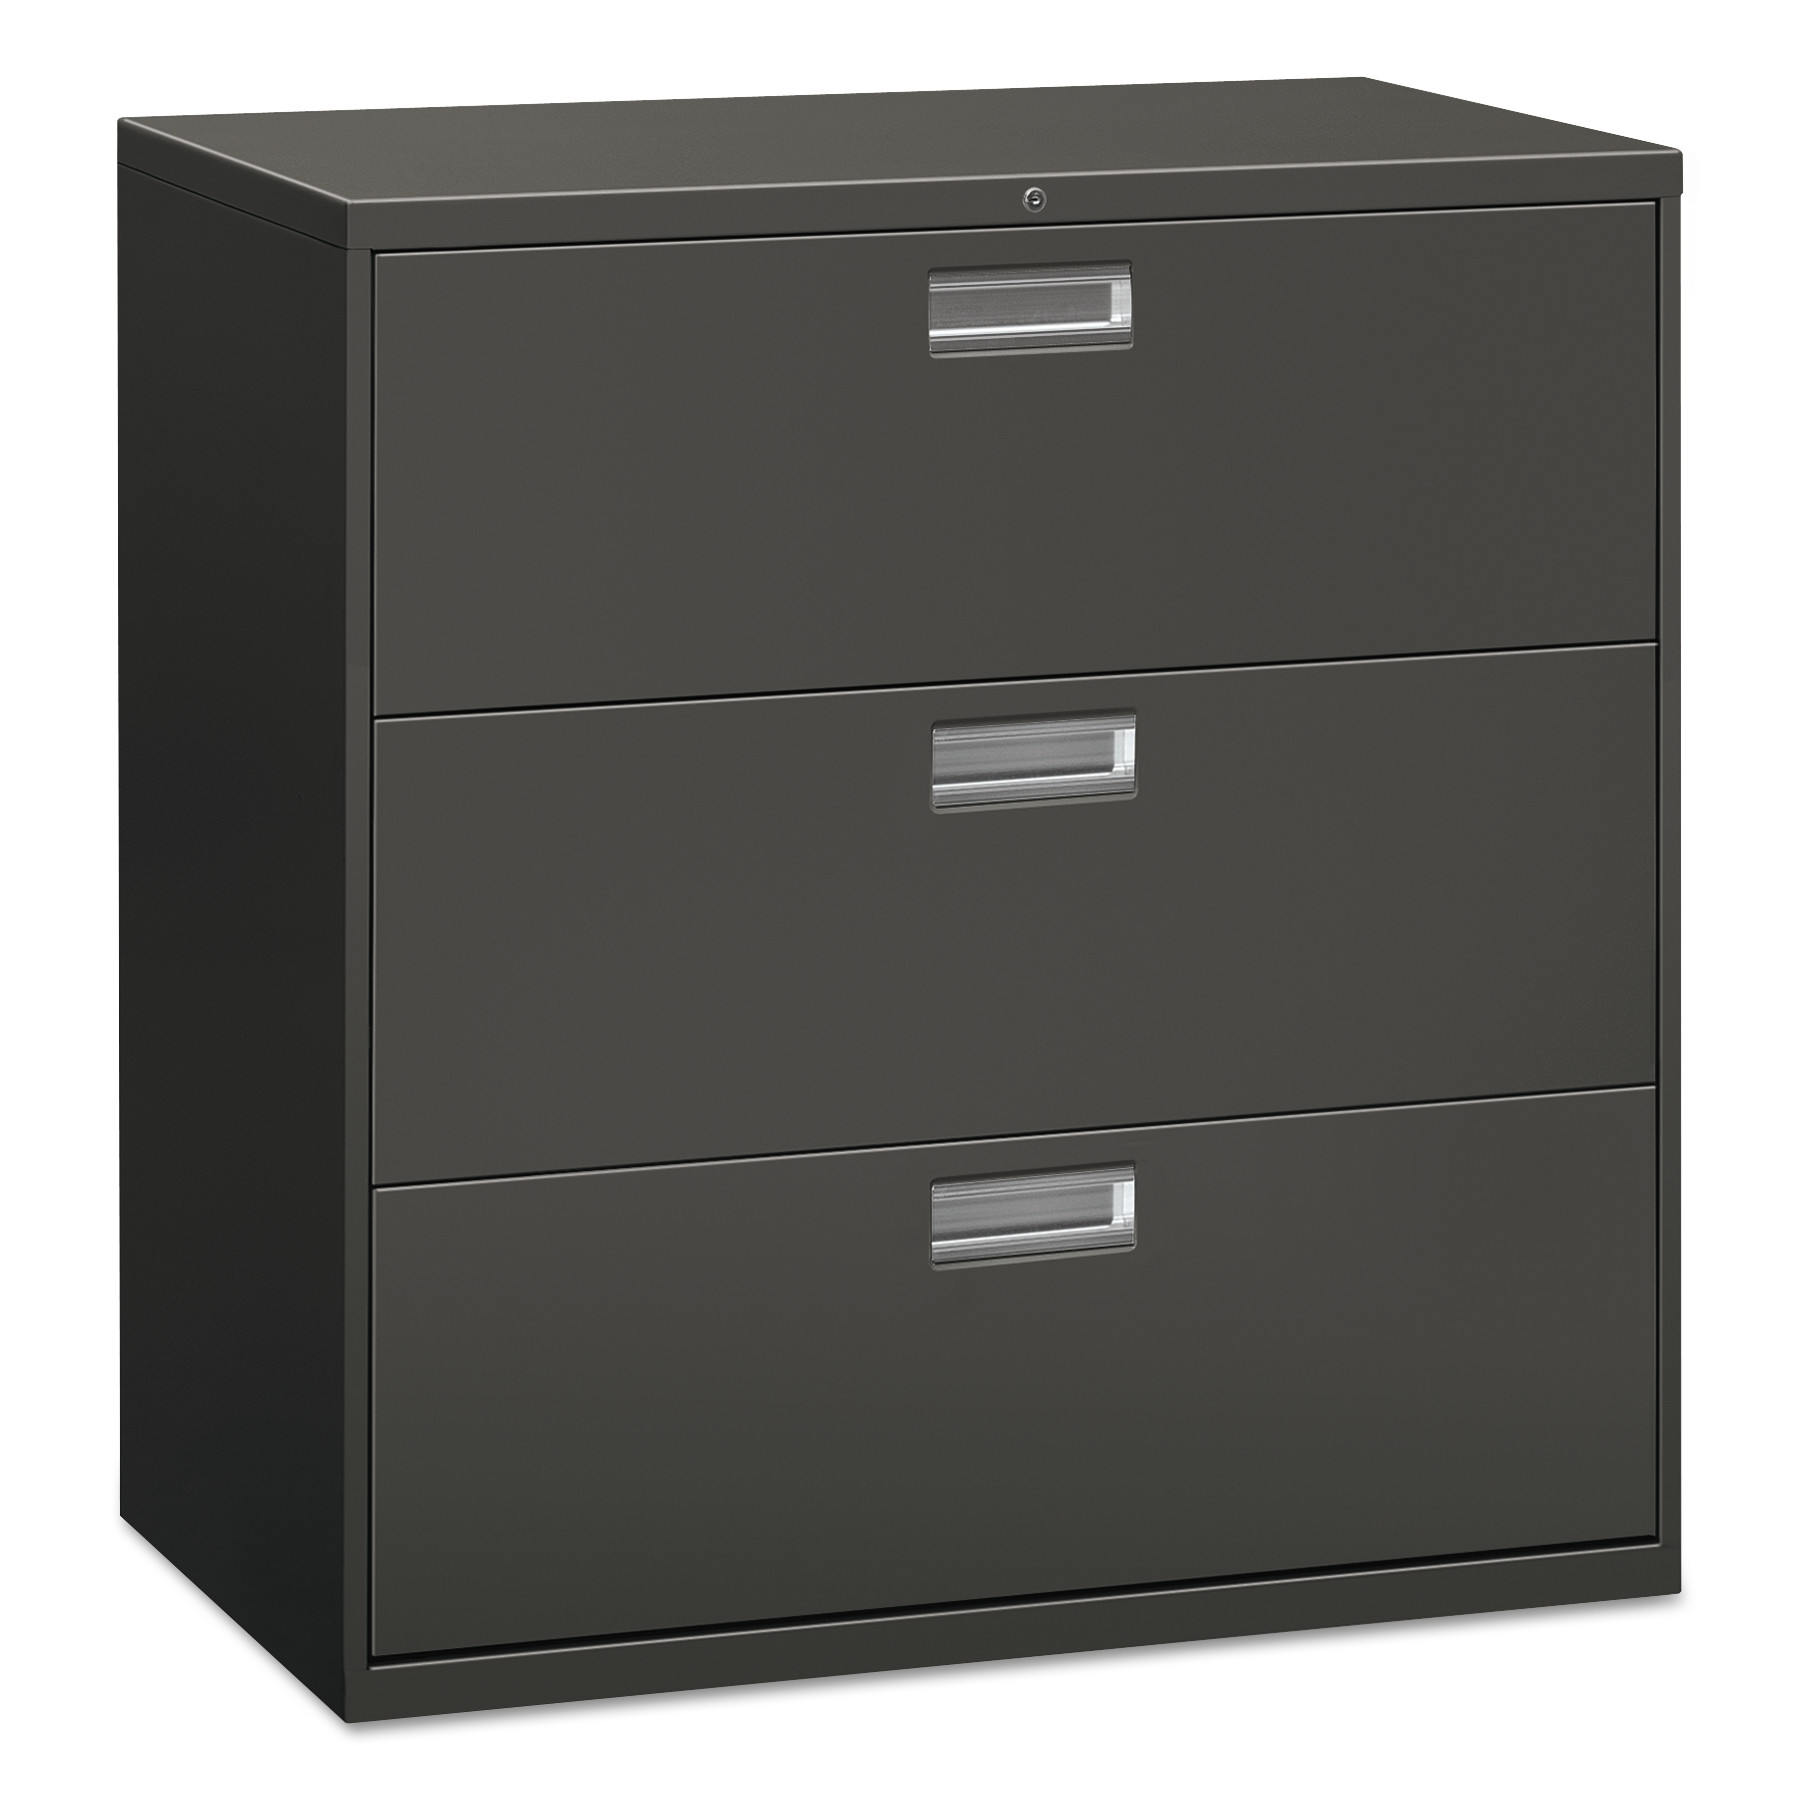 Alera Lateral File, 3 Drawer, 42w x 19.25d x 40.88h, Charcoal - image 1 of 2